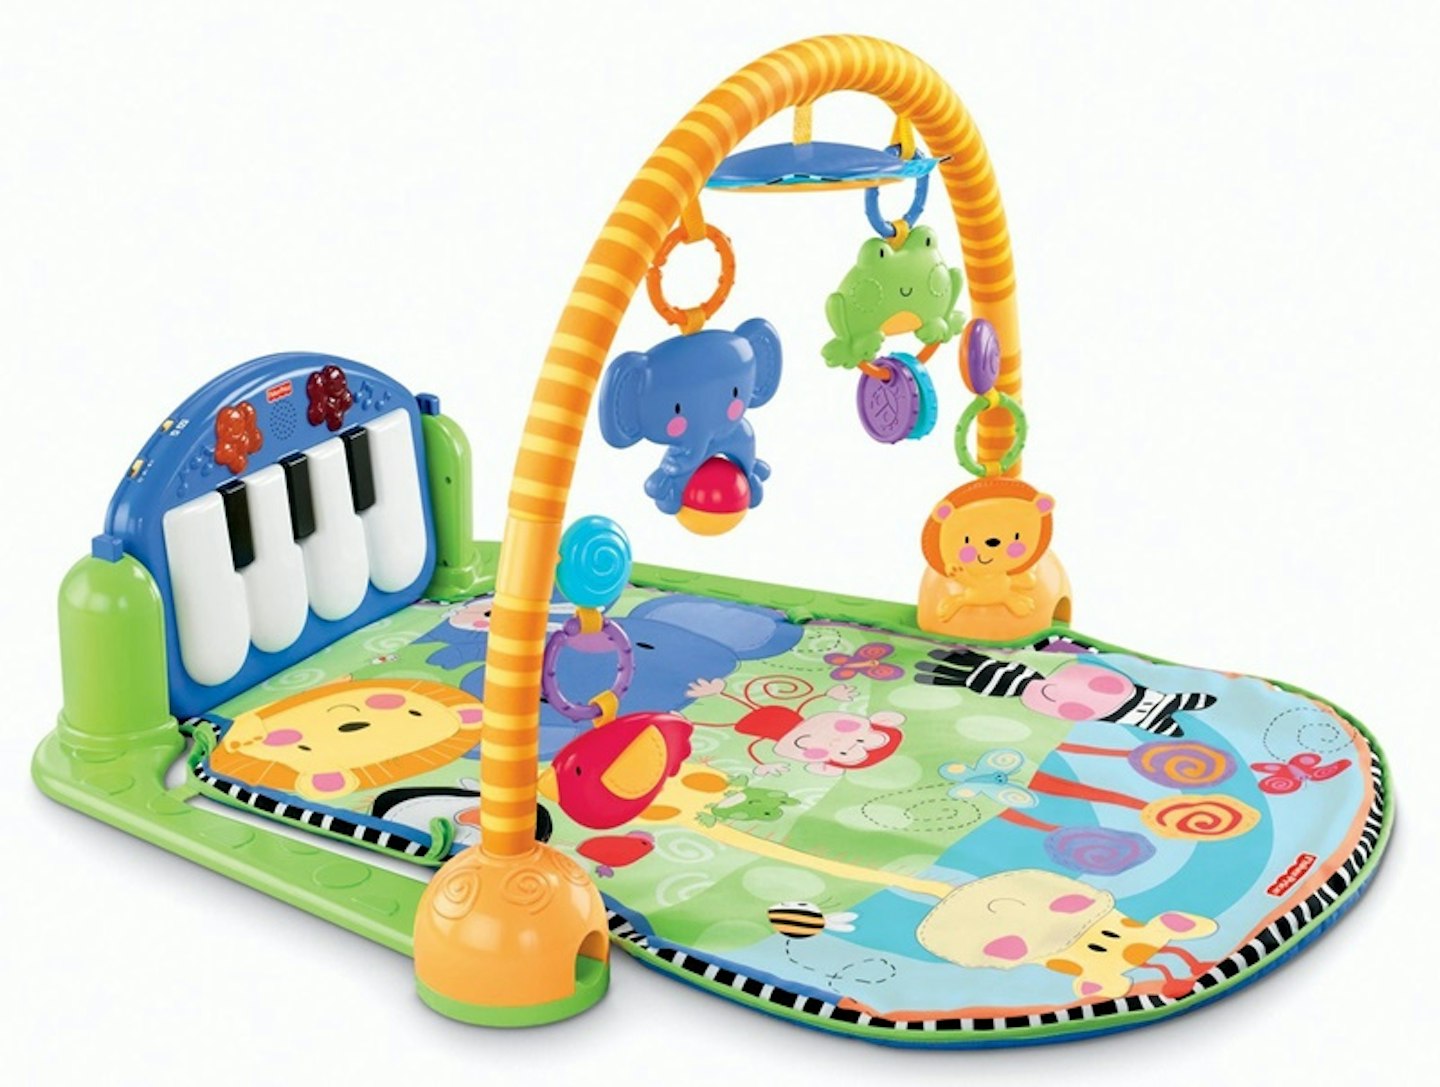 Fisher-Price Kick & Play Piano Gym review